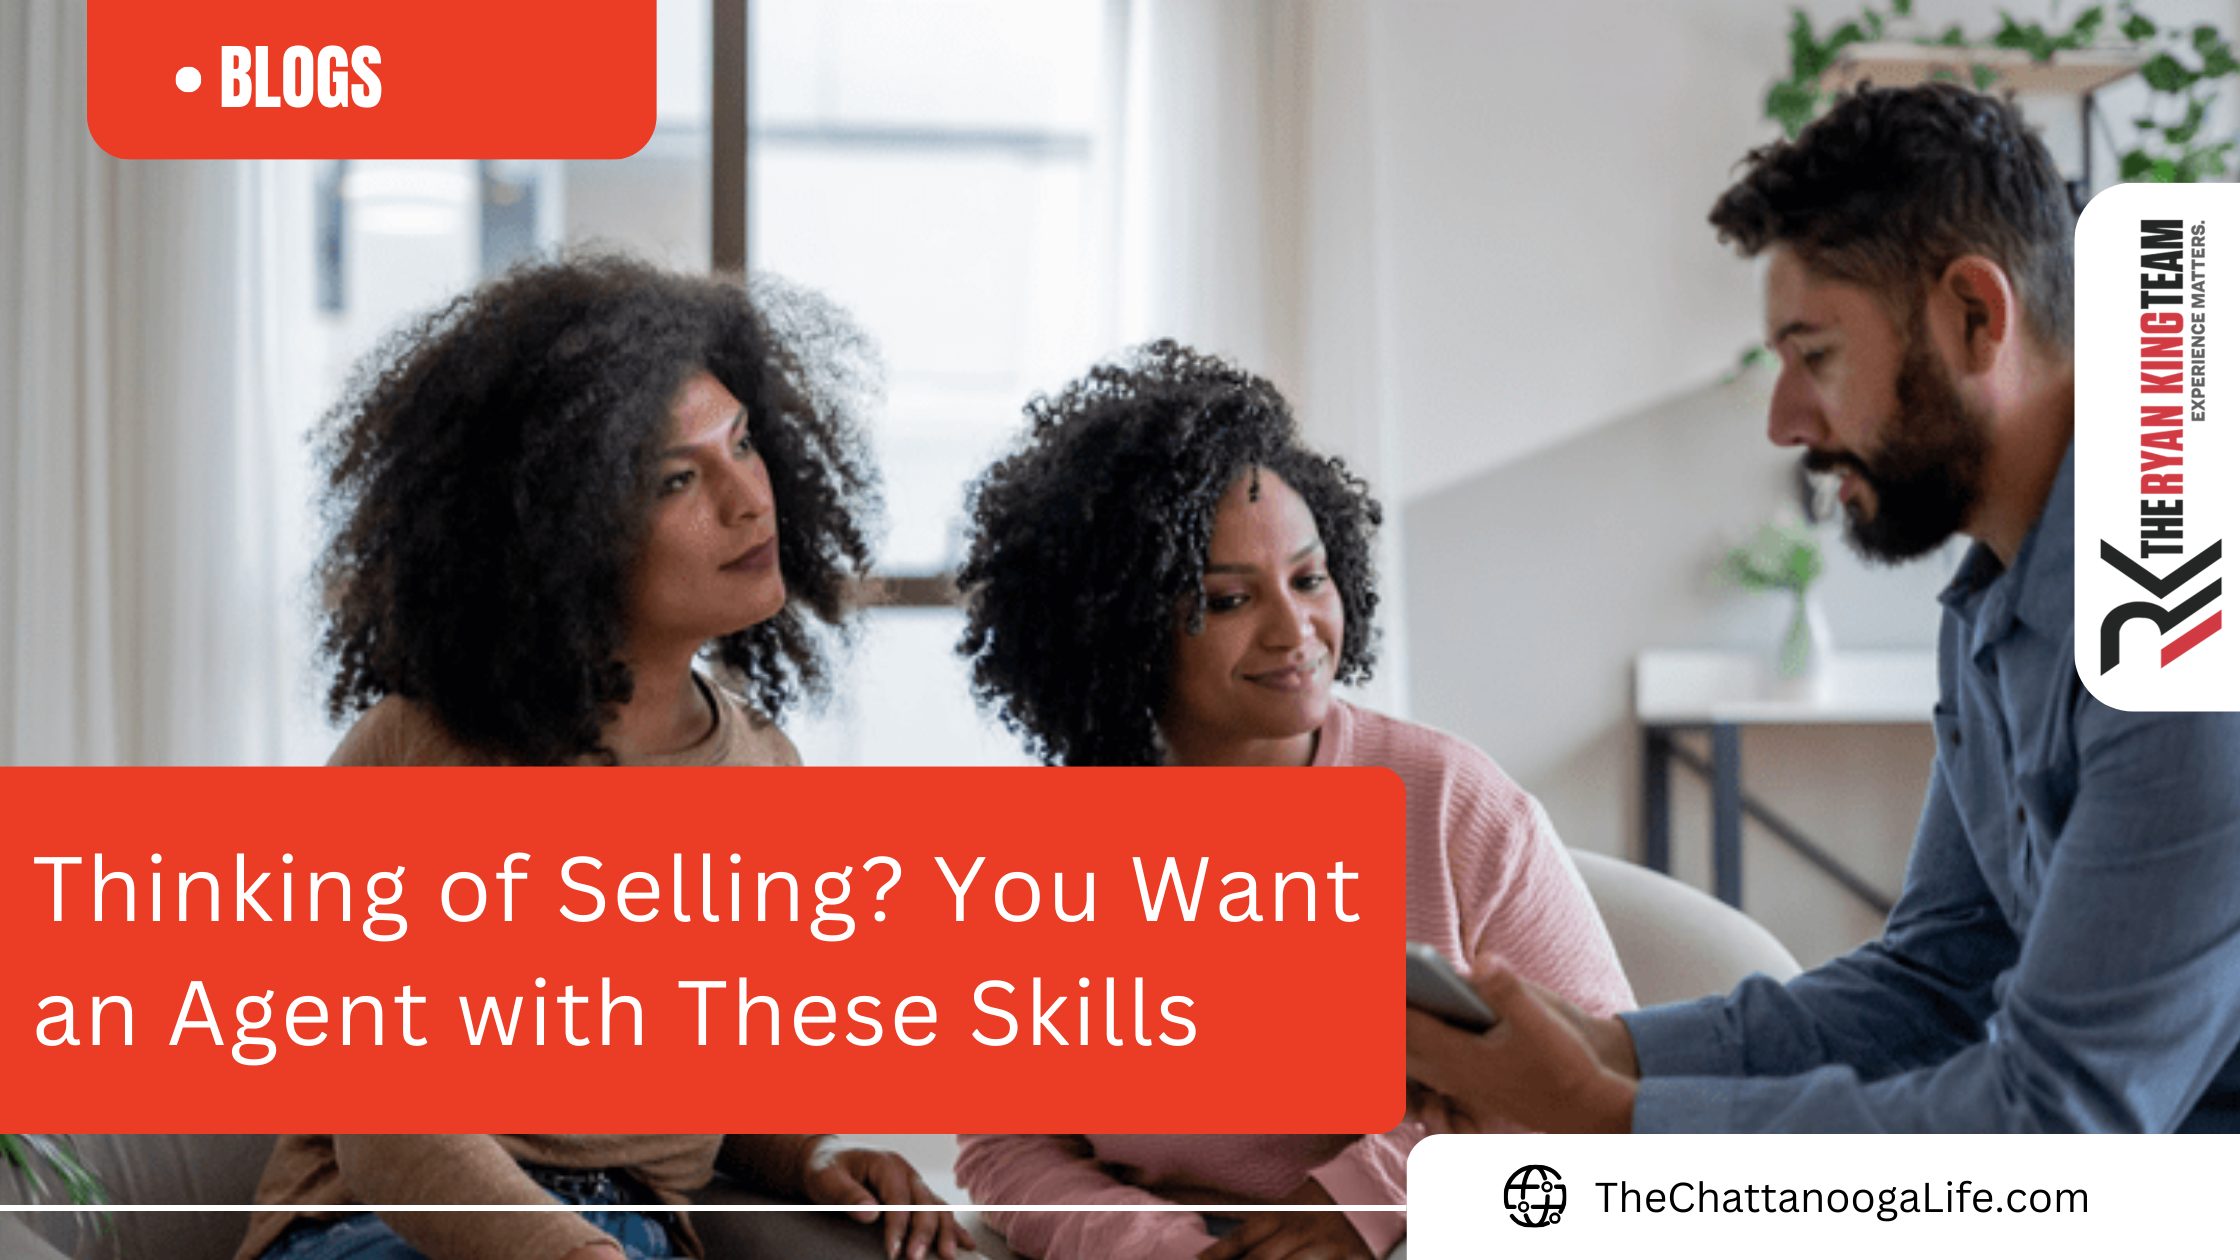 Thinking of Selling? You Want an Agent with These Skills